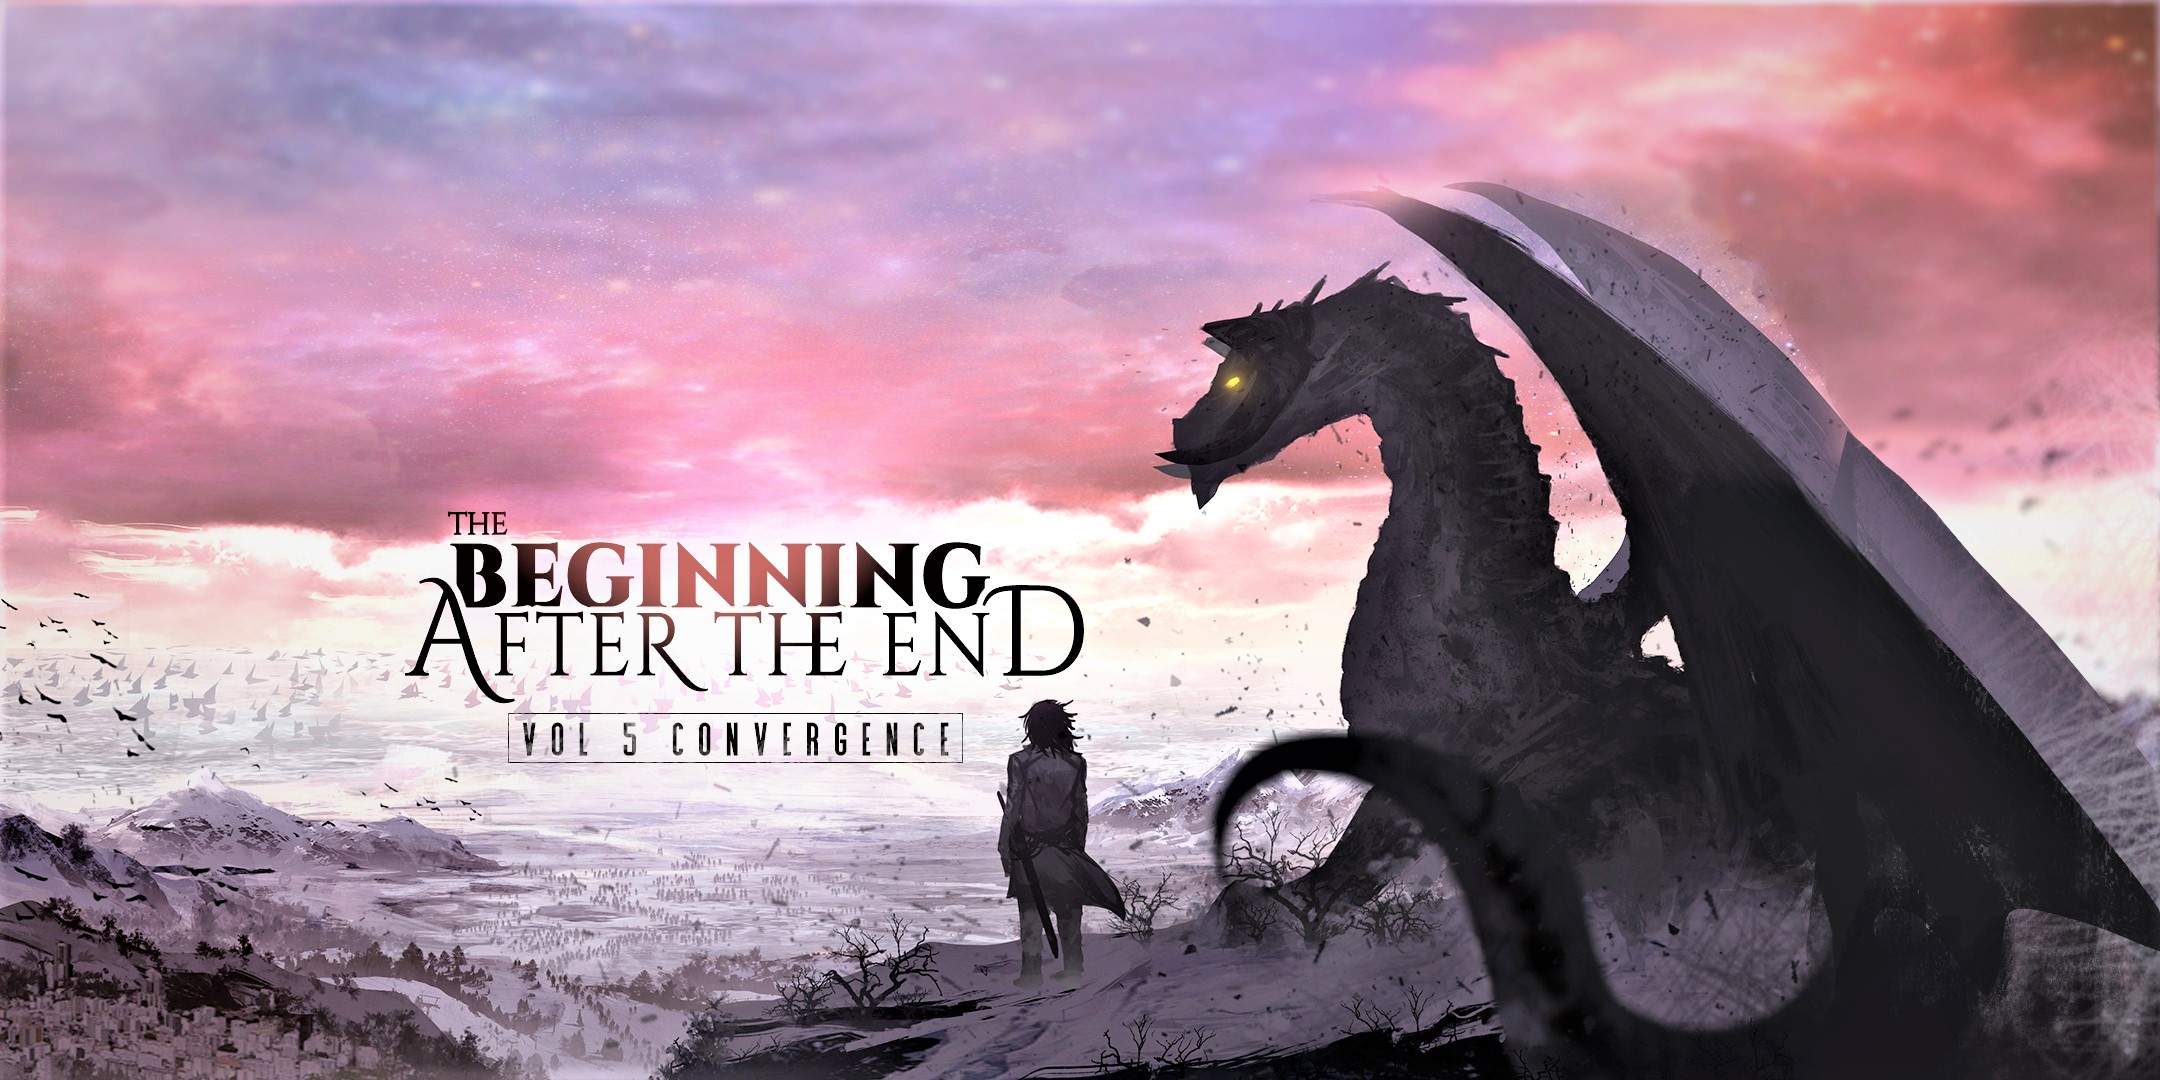 The Beginning After The End HD Wallpaper